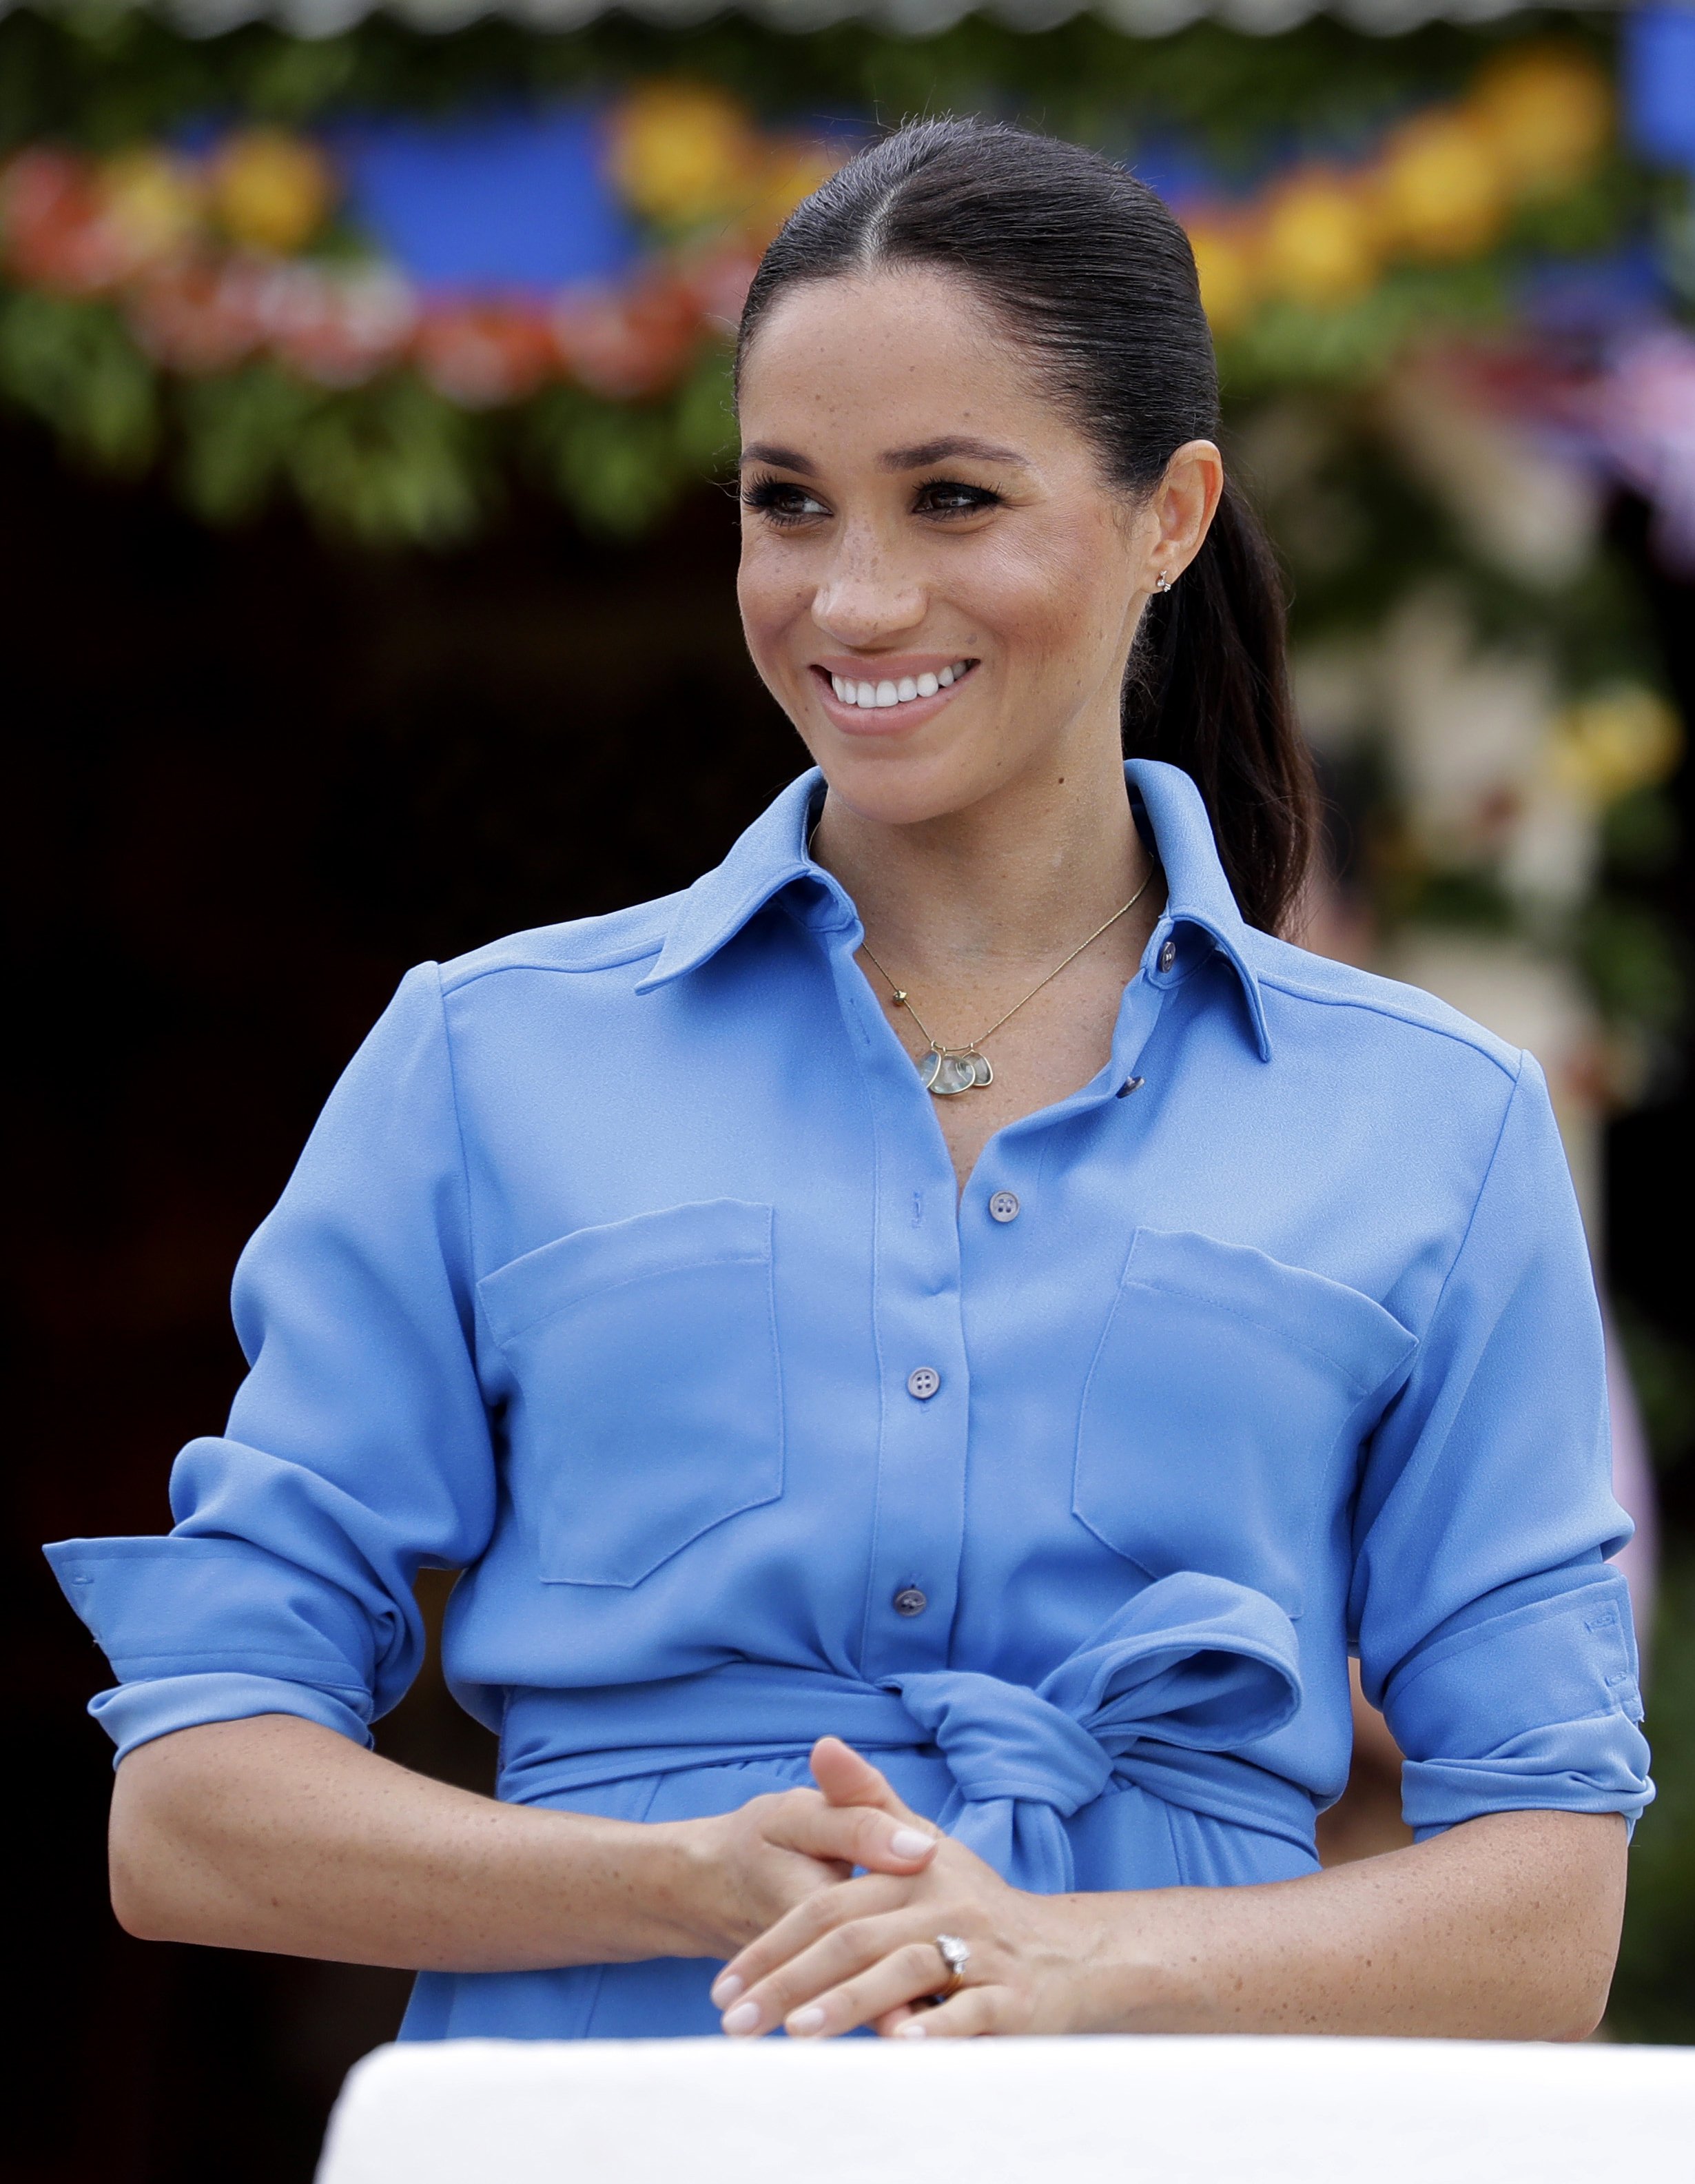 Meghan, Duchess of Sussex talks with students during a visit to Tupou College in Tonga on October 26, 2018 | Source: Getty Images